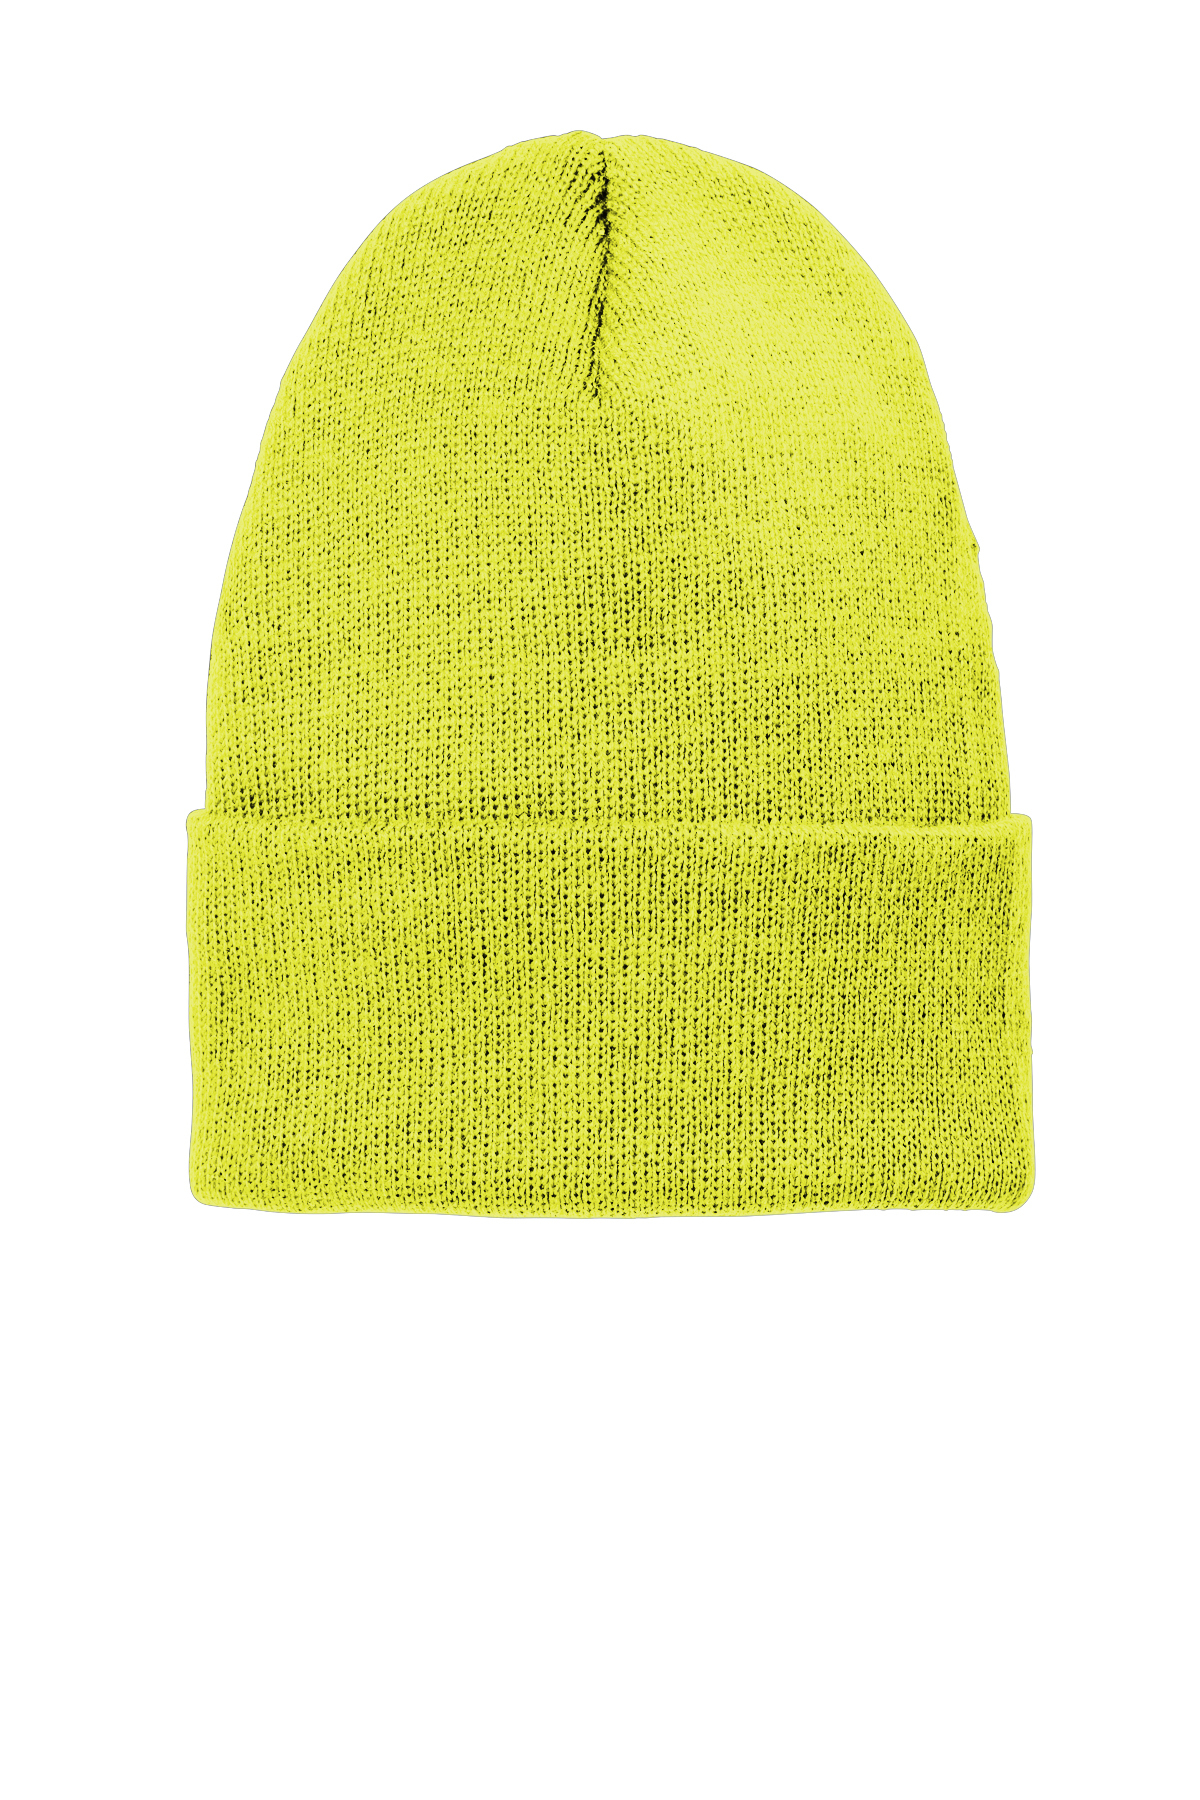 Volunteer Knitwear Chore Beanie | Product | Company Casuals